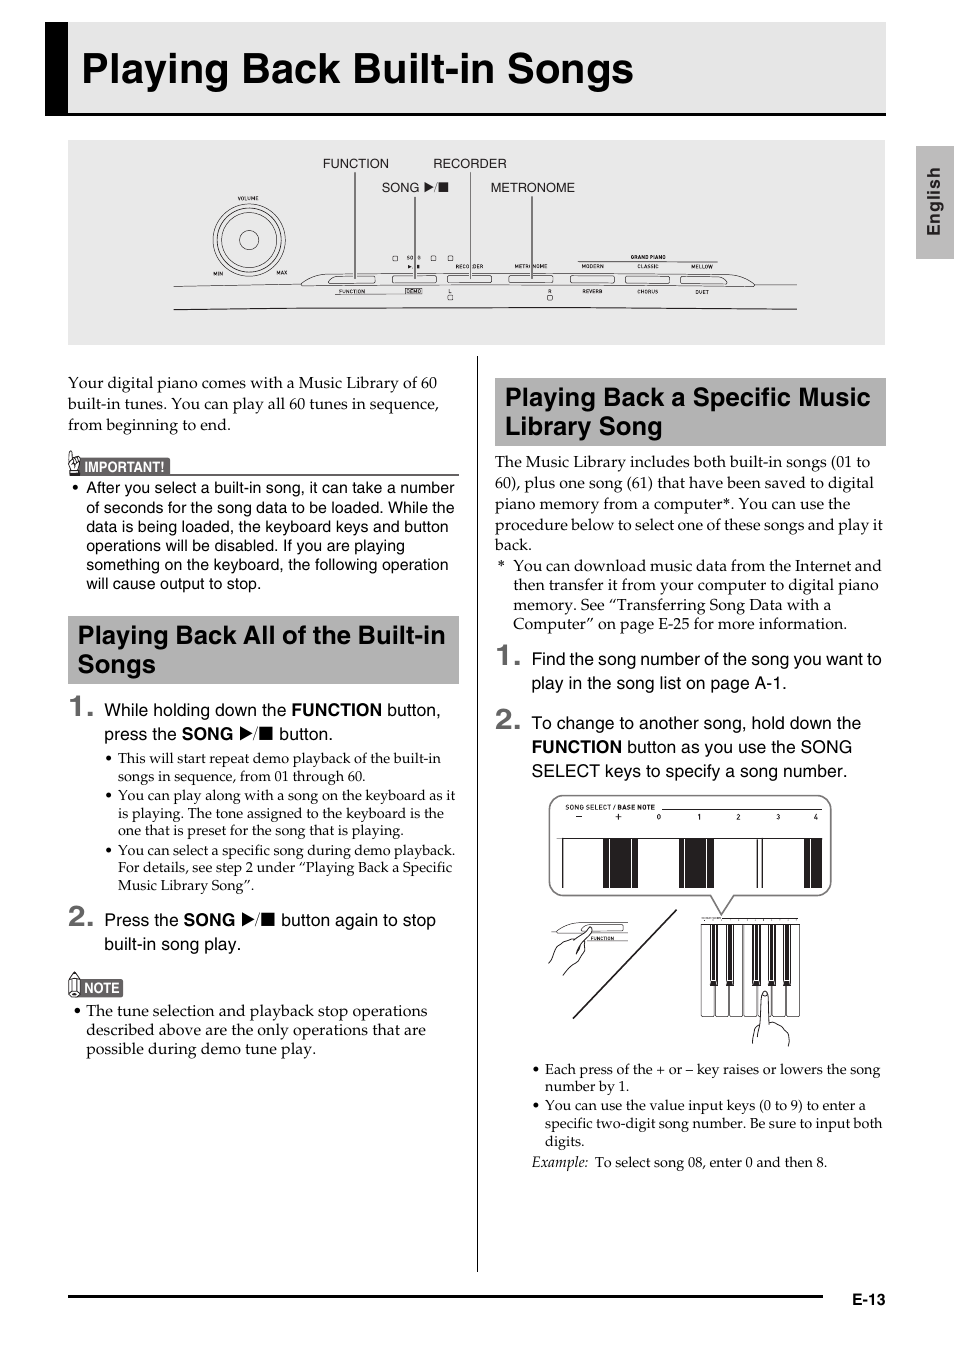 Playing back built-in songs | Casio PRIVIA PX135 User Manual | Page 15 / 37